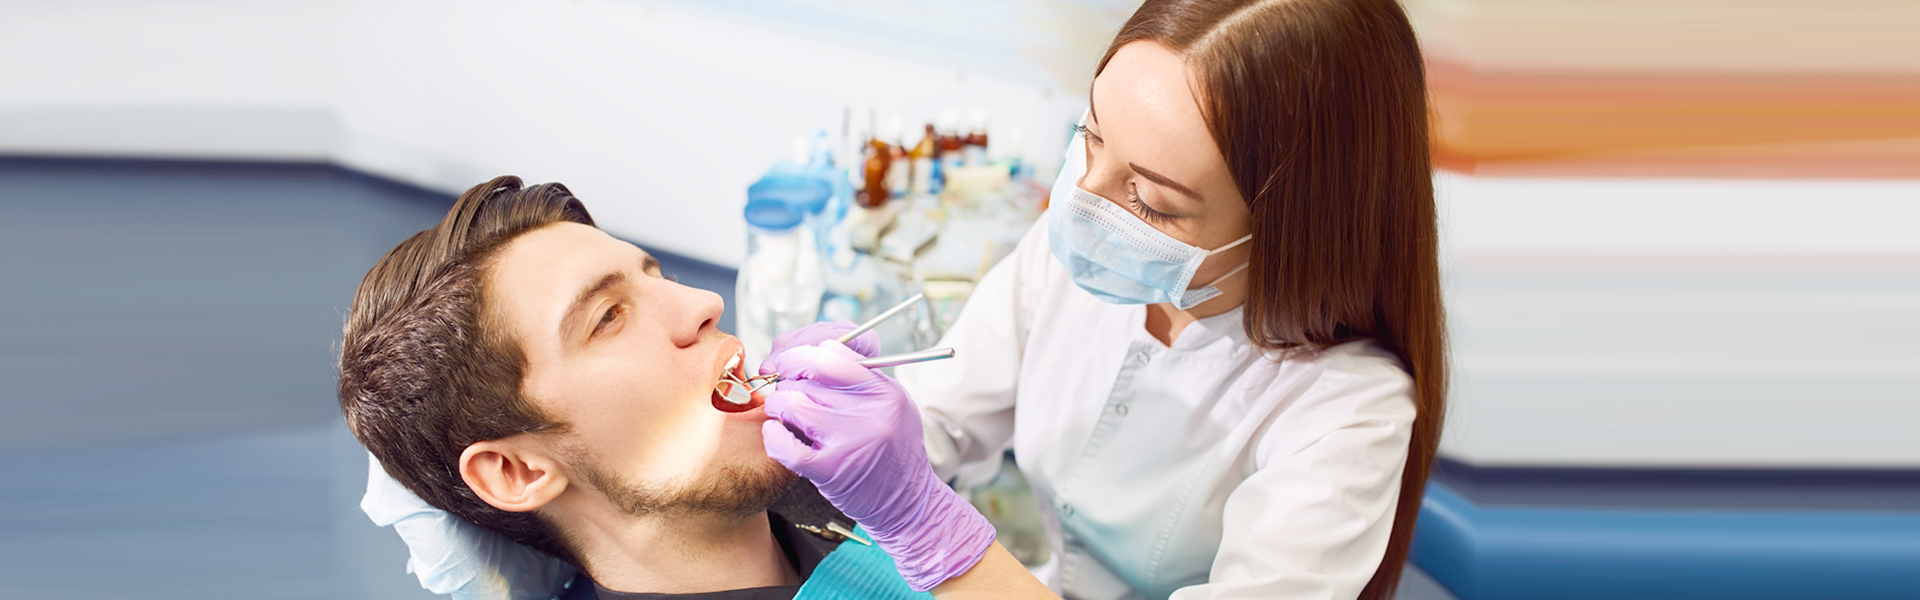 4 reasons to consider dental exam and teeth cleaning